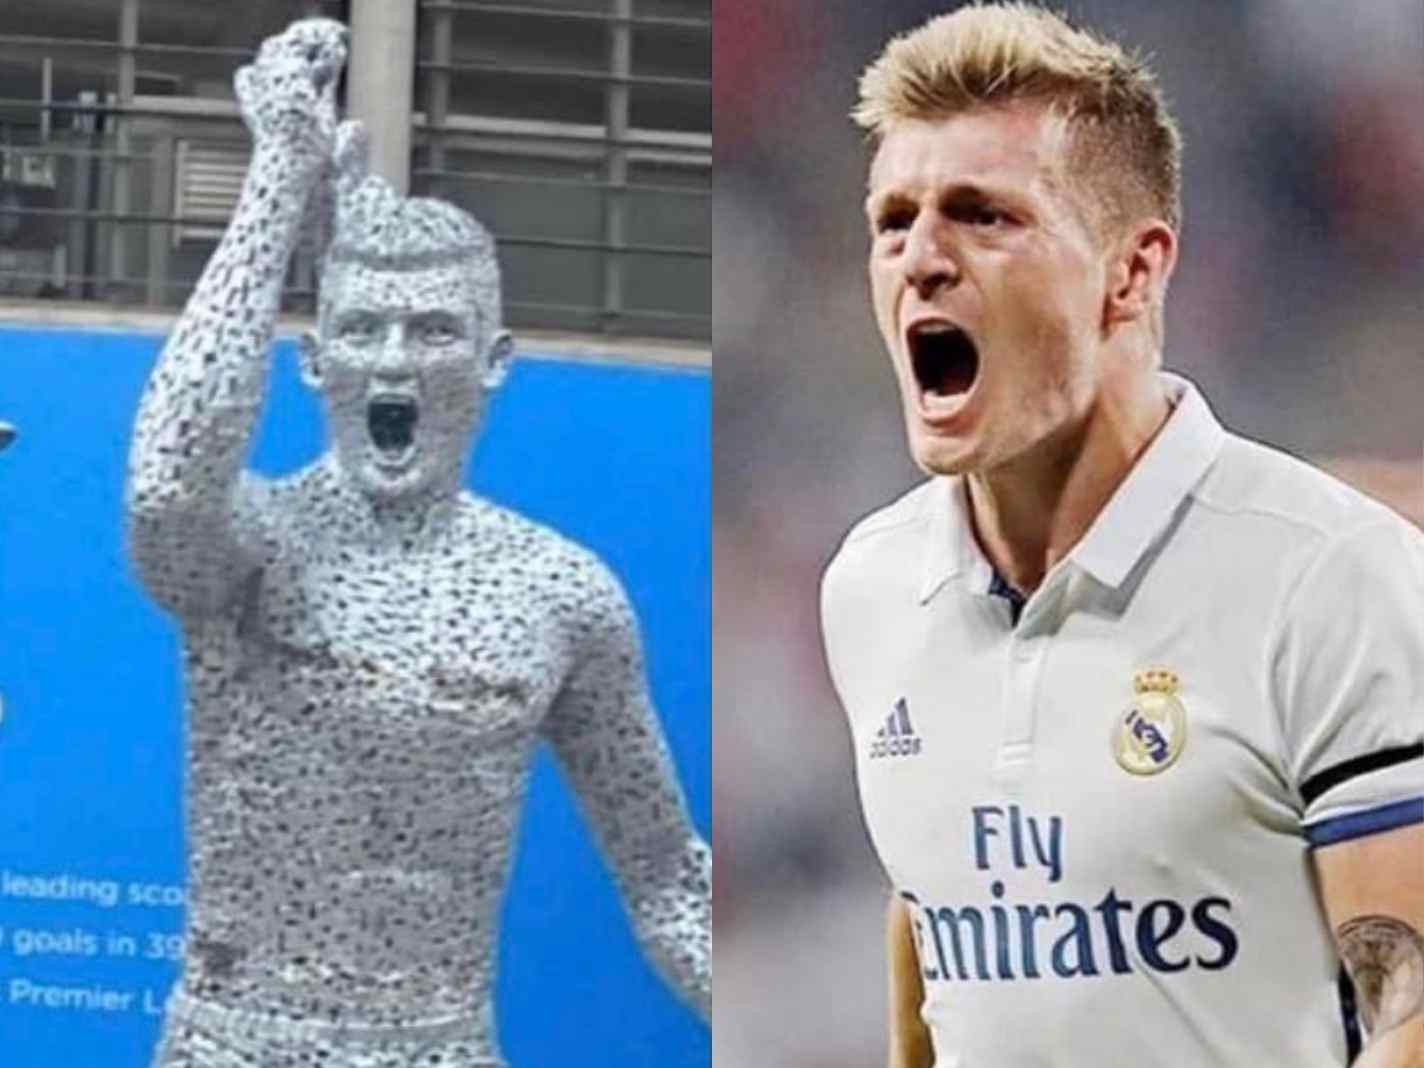 In this image - A comparison between new Sergio Aguero statue and Toni Kroos